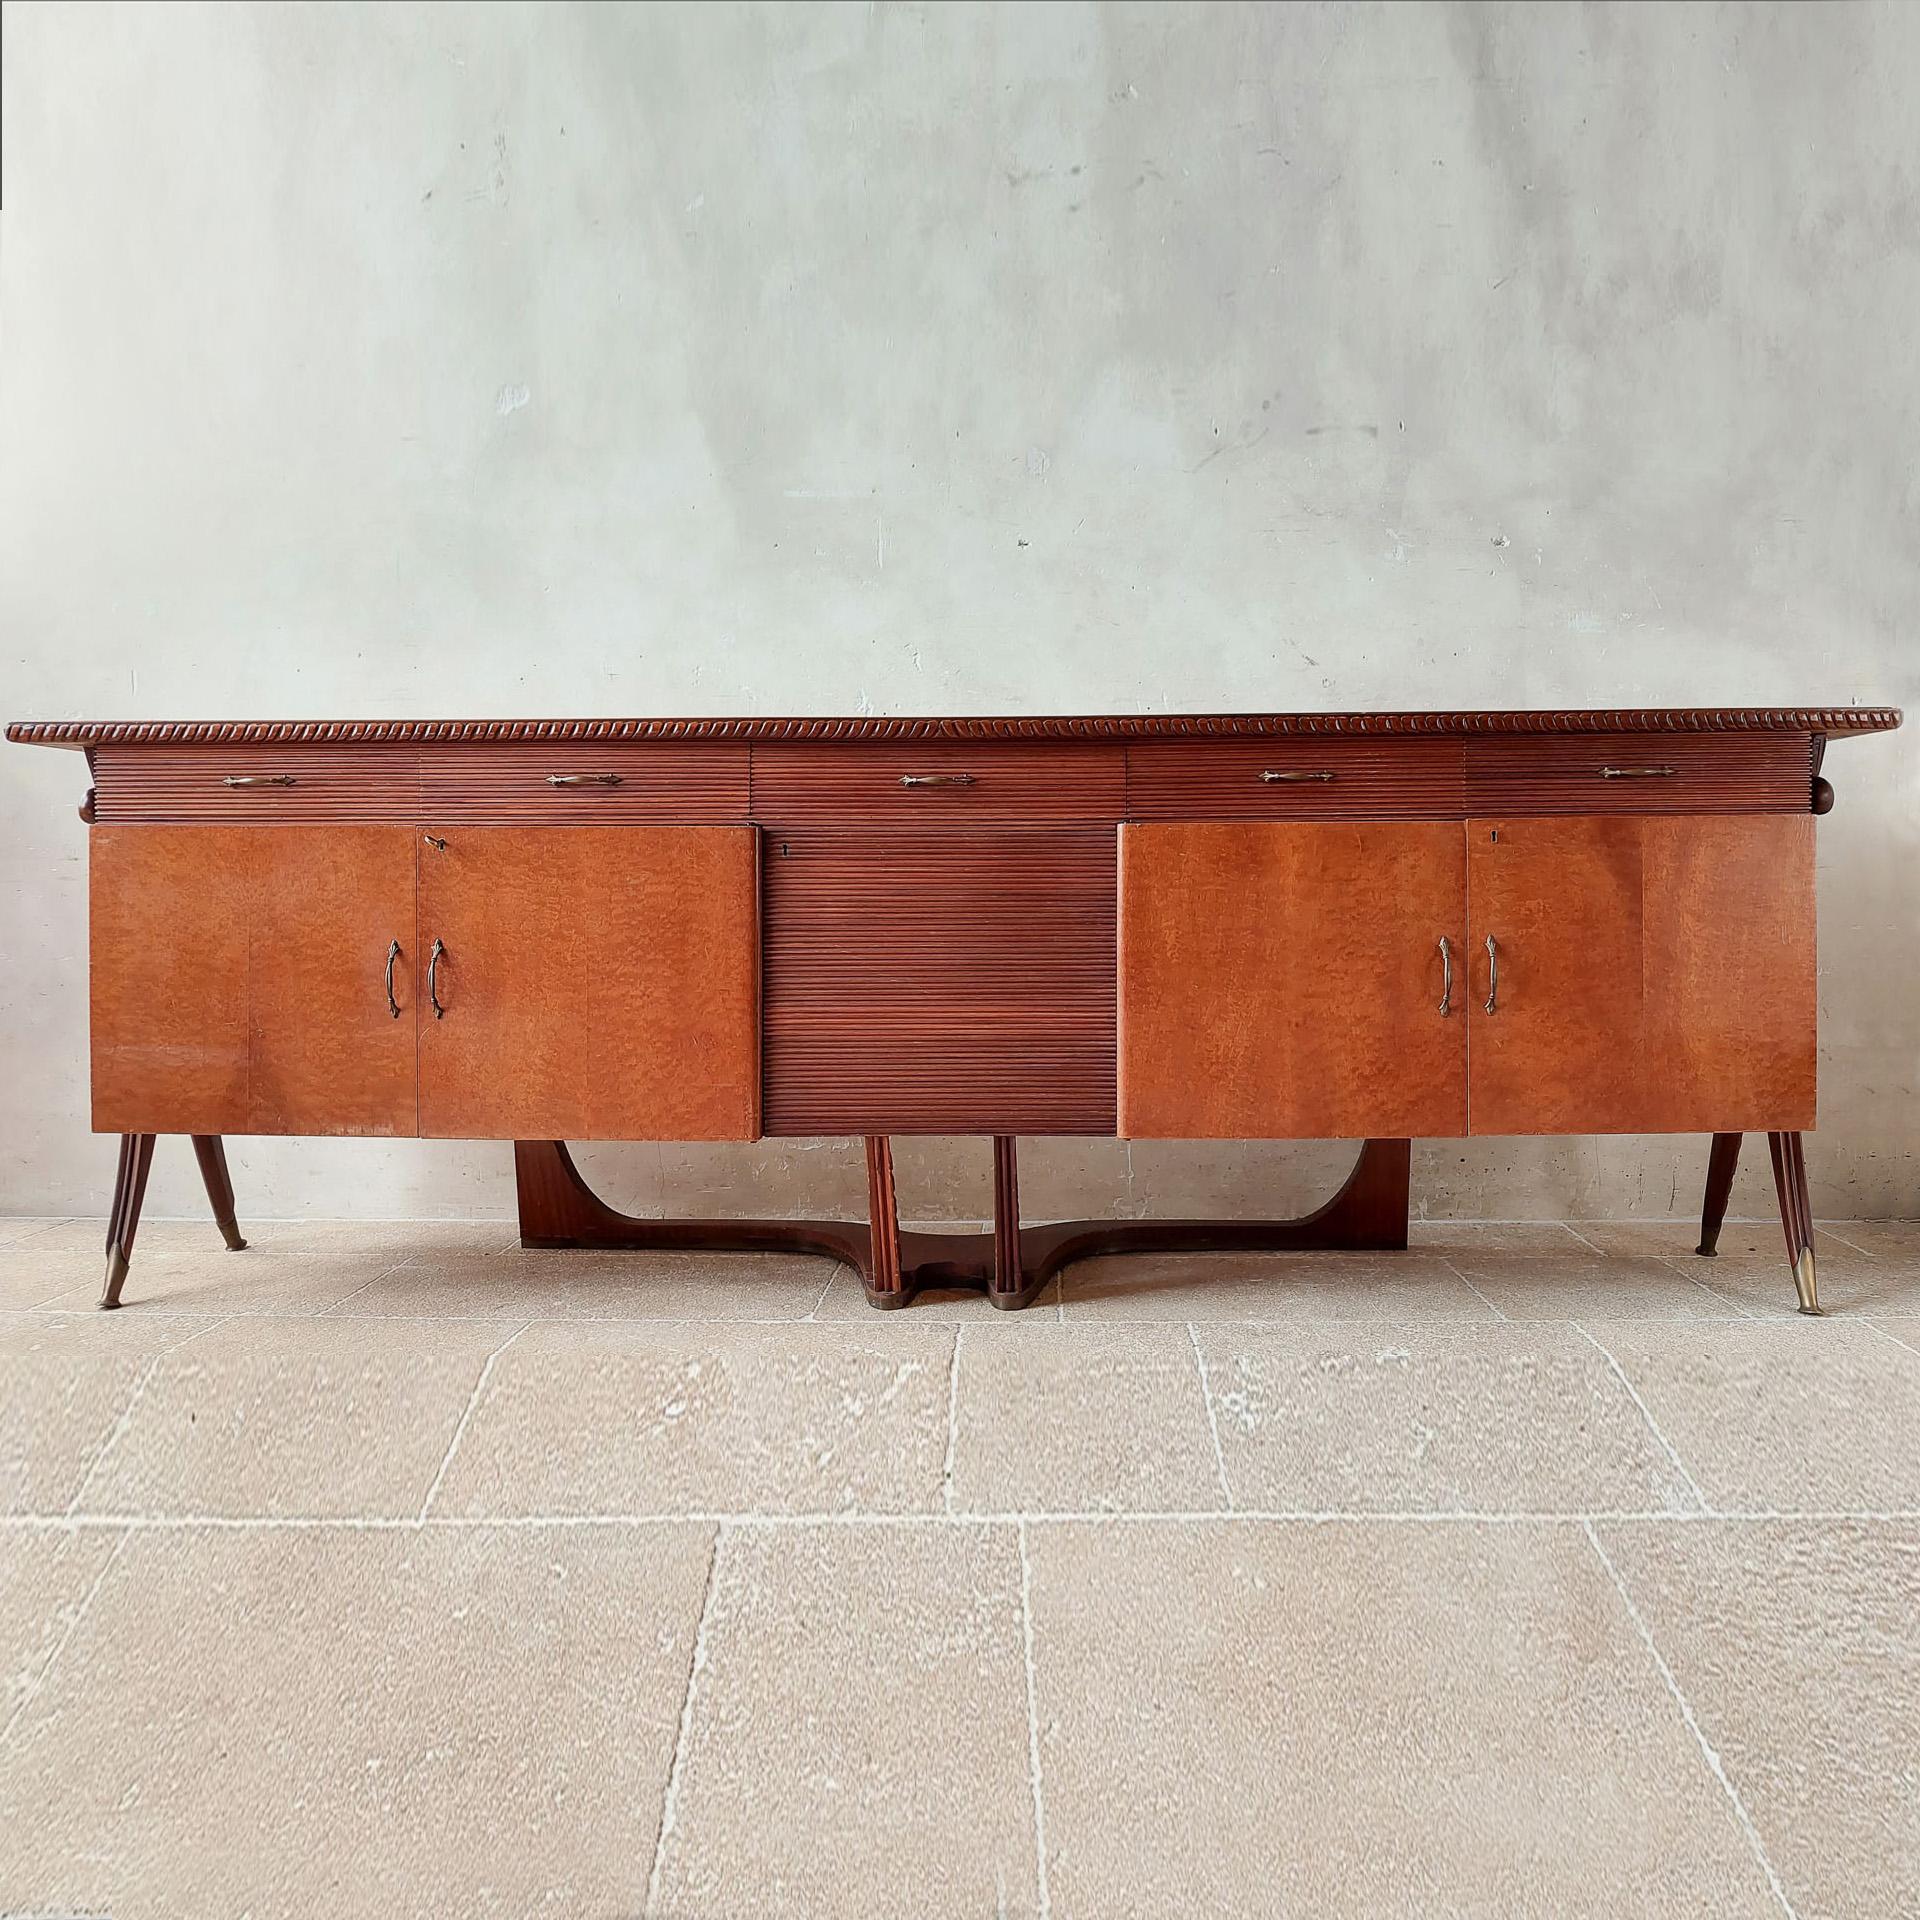 Mid-century Italian sideboard attributed to Osvaldo Borsani from the 1940s. This large, 3 meter wide cabinet, is made of walnut with lacquered parts and burl wood veneer, with beautiful patterned lines in the wood and patterns in the legs and the